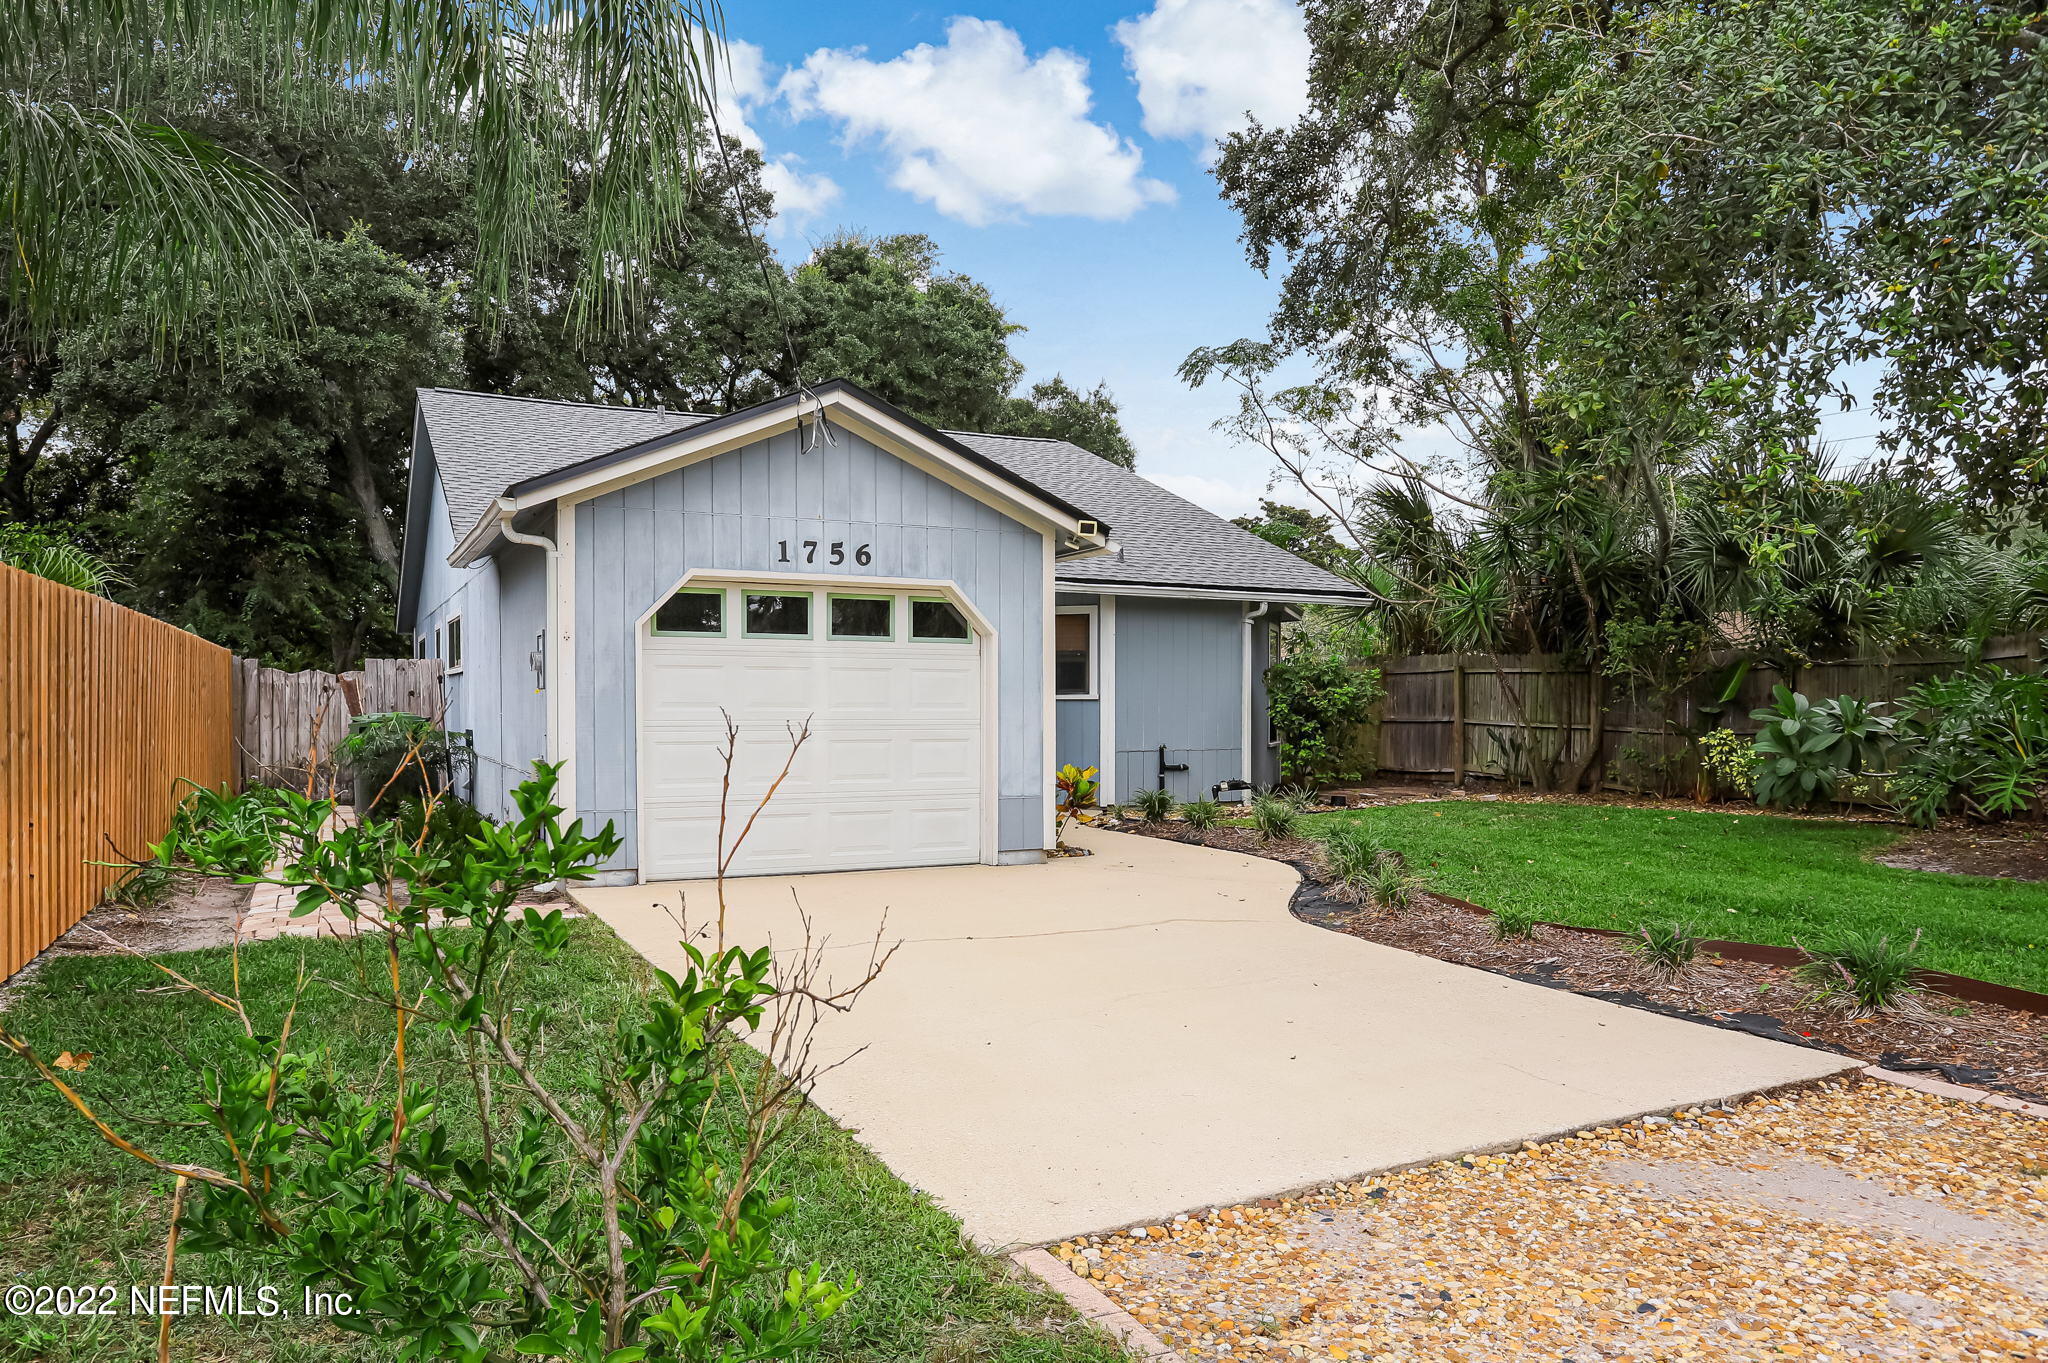 Jacksonville Beach, FL home for sale located at 1756 RILEY Street, Jacksonville Beach, FL 32250